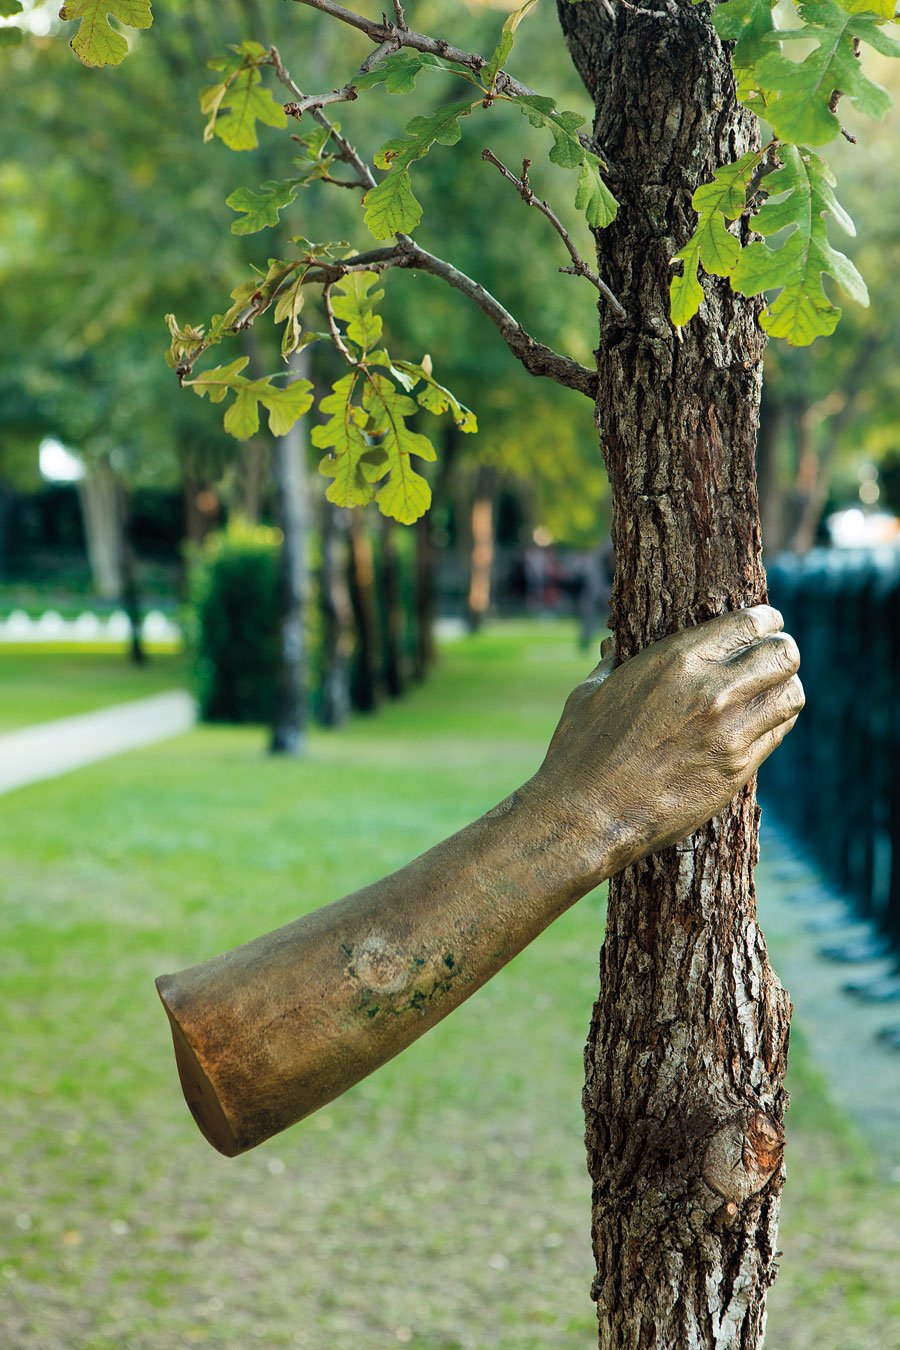 Giuseppe Penone, It Will Continue to Grow Except at That Point, 1968. Bronze, 15 3/4 x 3 7/8 x 5 1/8 inches. Photo:Kevin Todora for the Nasher Sculpture Center.